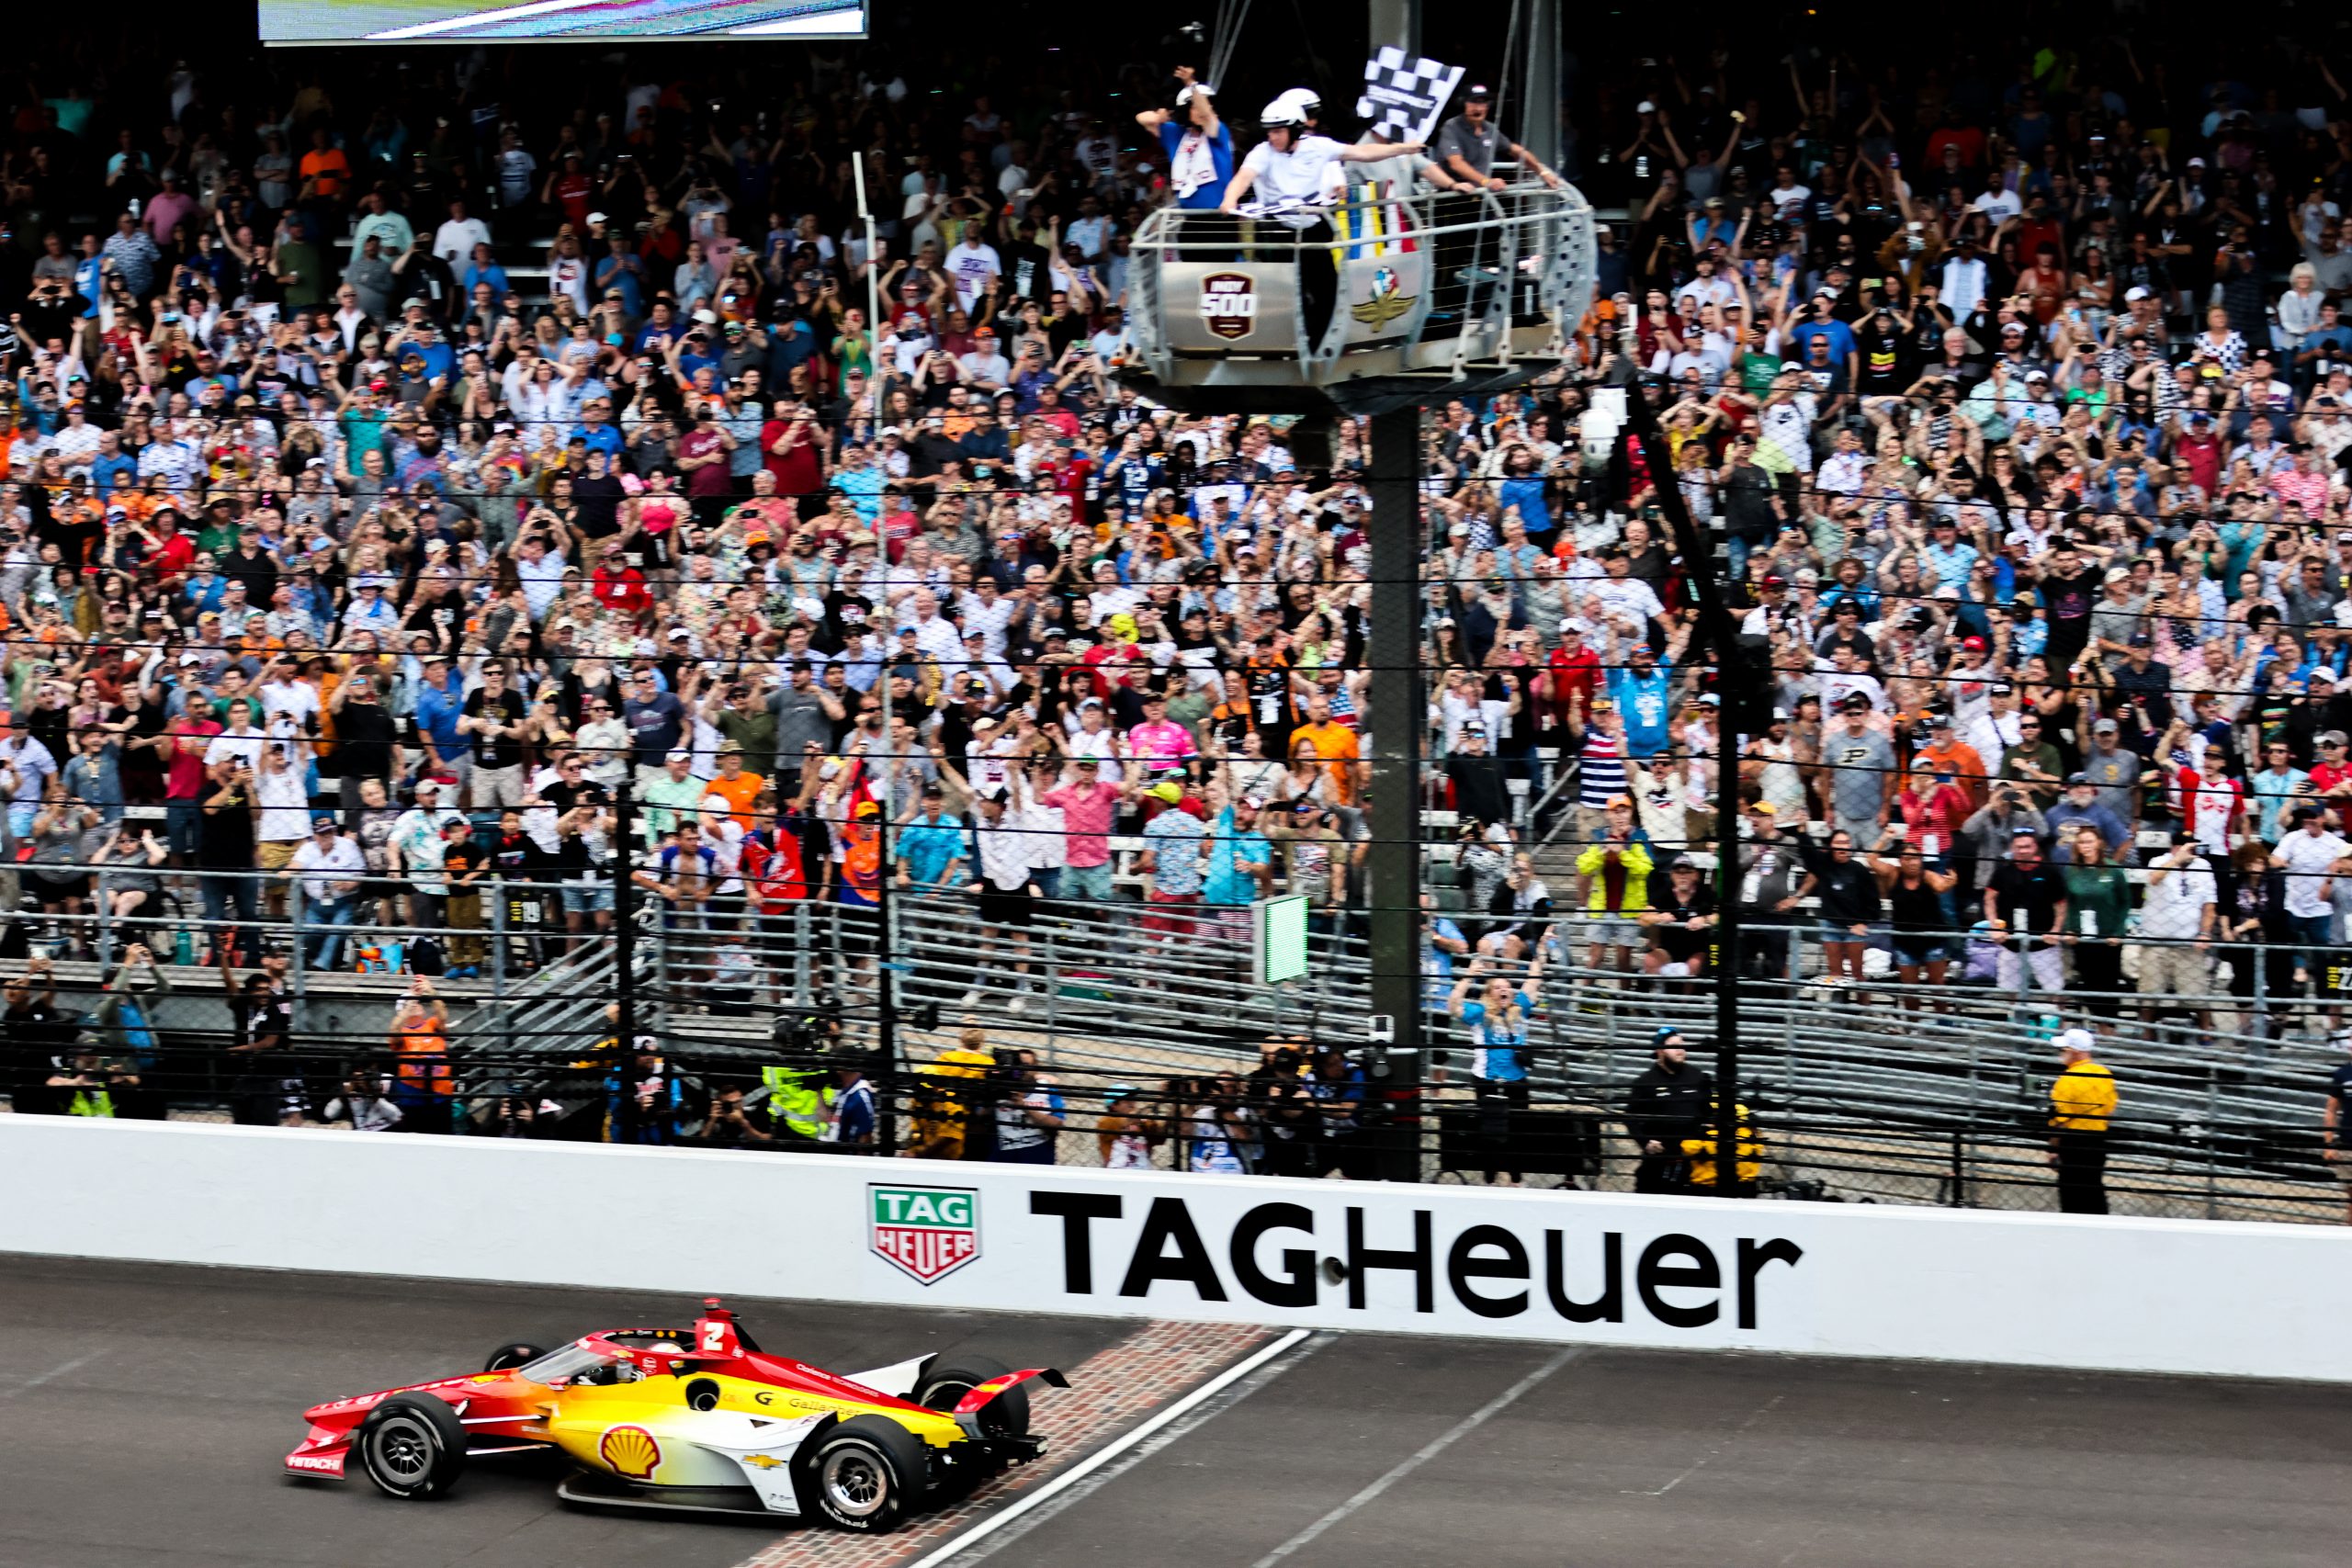 Josef Newgarden takes the checkered flag in the 108th running of the Indianapolis 500 (Photo: Wayne Riegle | The Podium Finish)